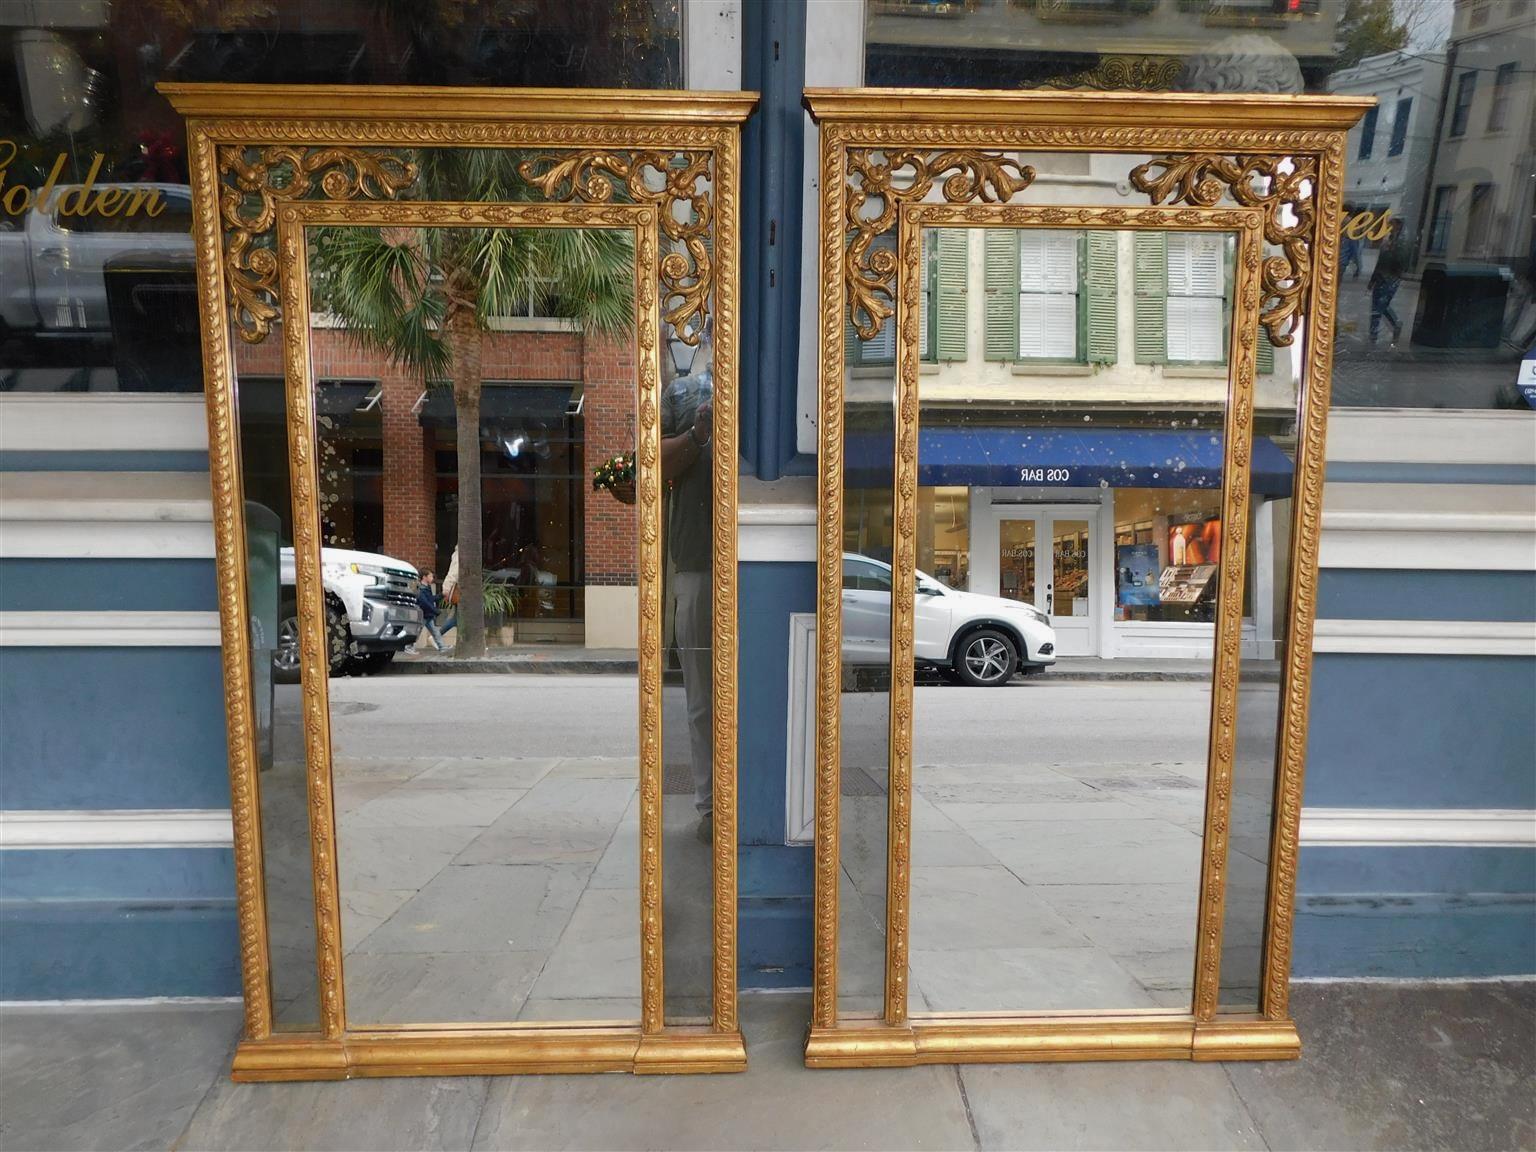 Pair of English Regency gilt wood and gesso articulated carved foliage wall mirrors. Mirrors retain the original glass and wood backing. Early 19th century.